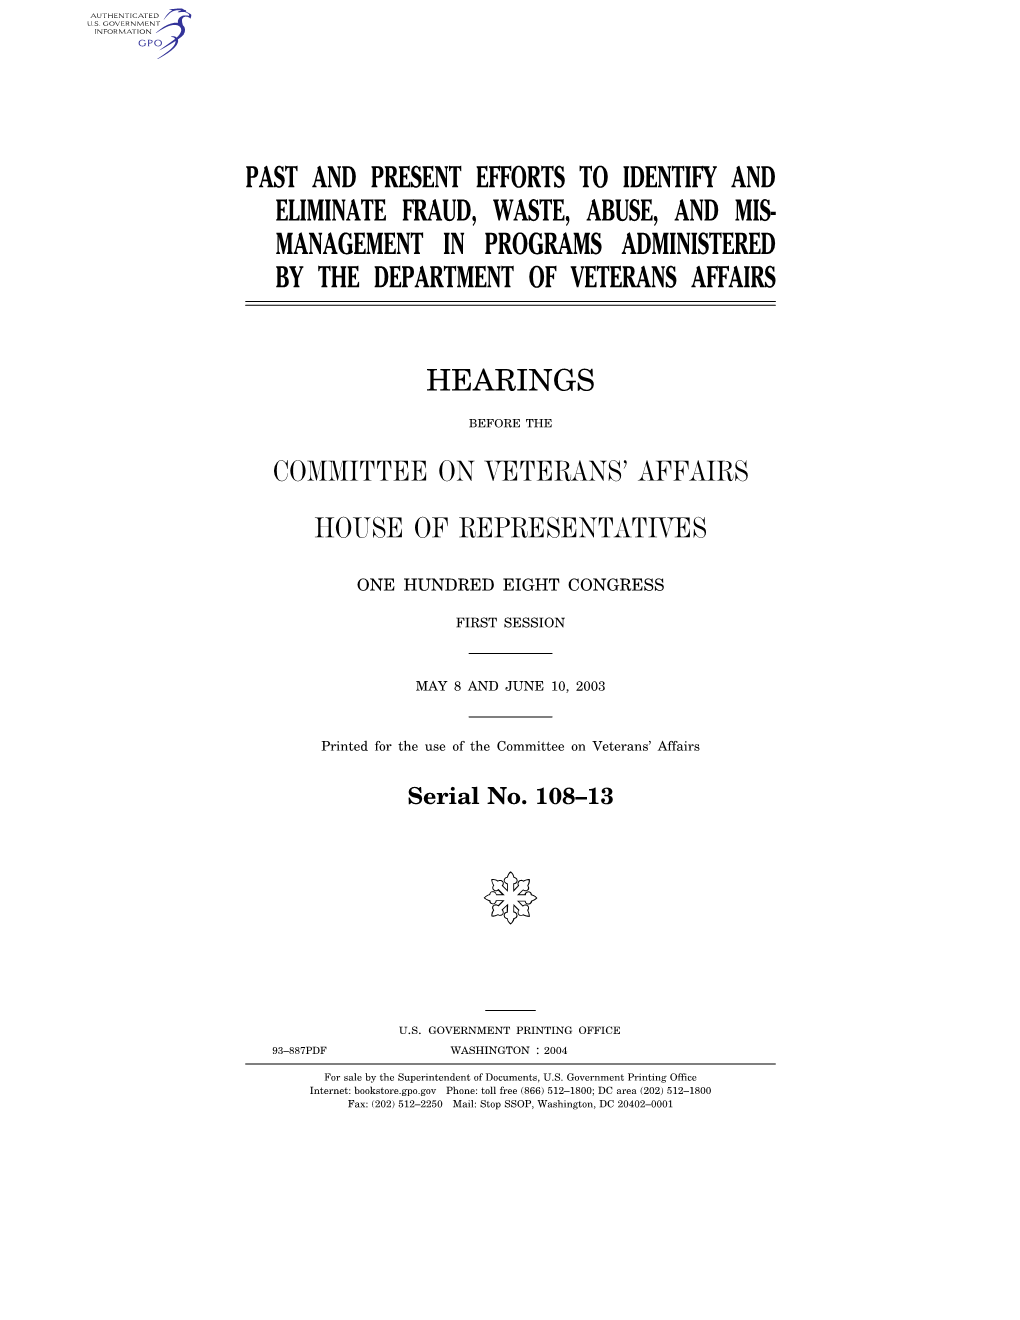 Past and Present Efforts to Identify and Eliminate Fraud, Waste, Abuse, and Mis- Management in Programs Administered by the Department of Veterans Affairs